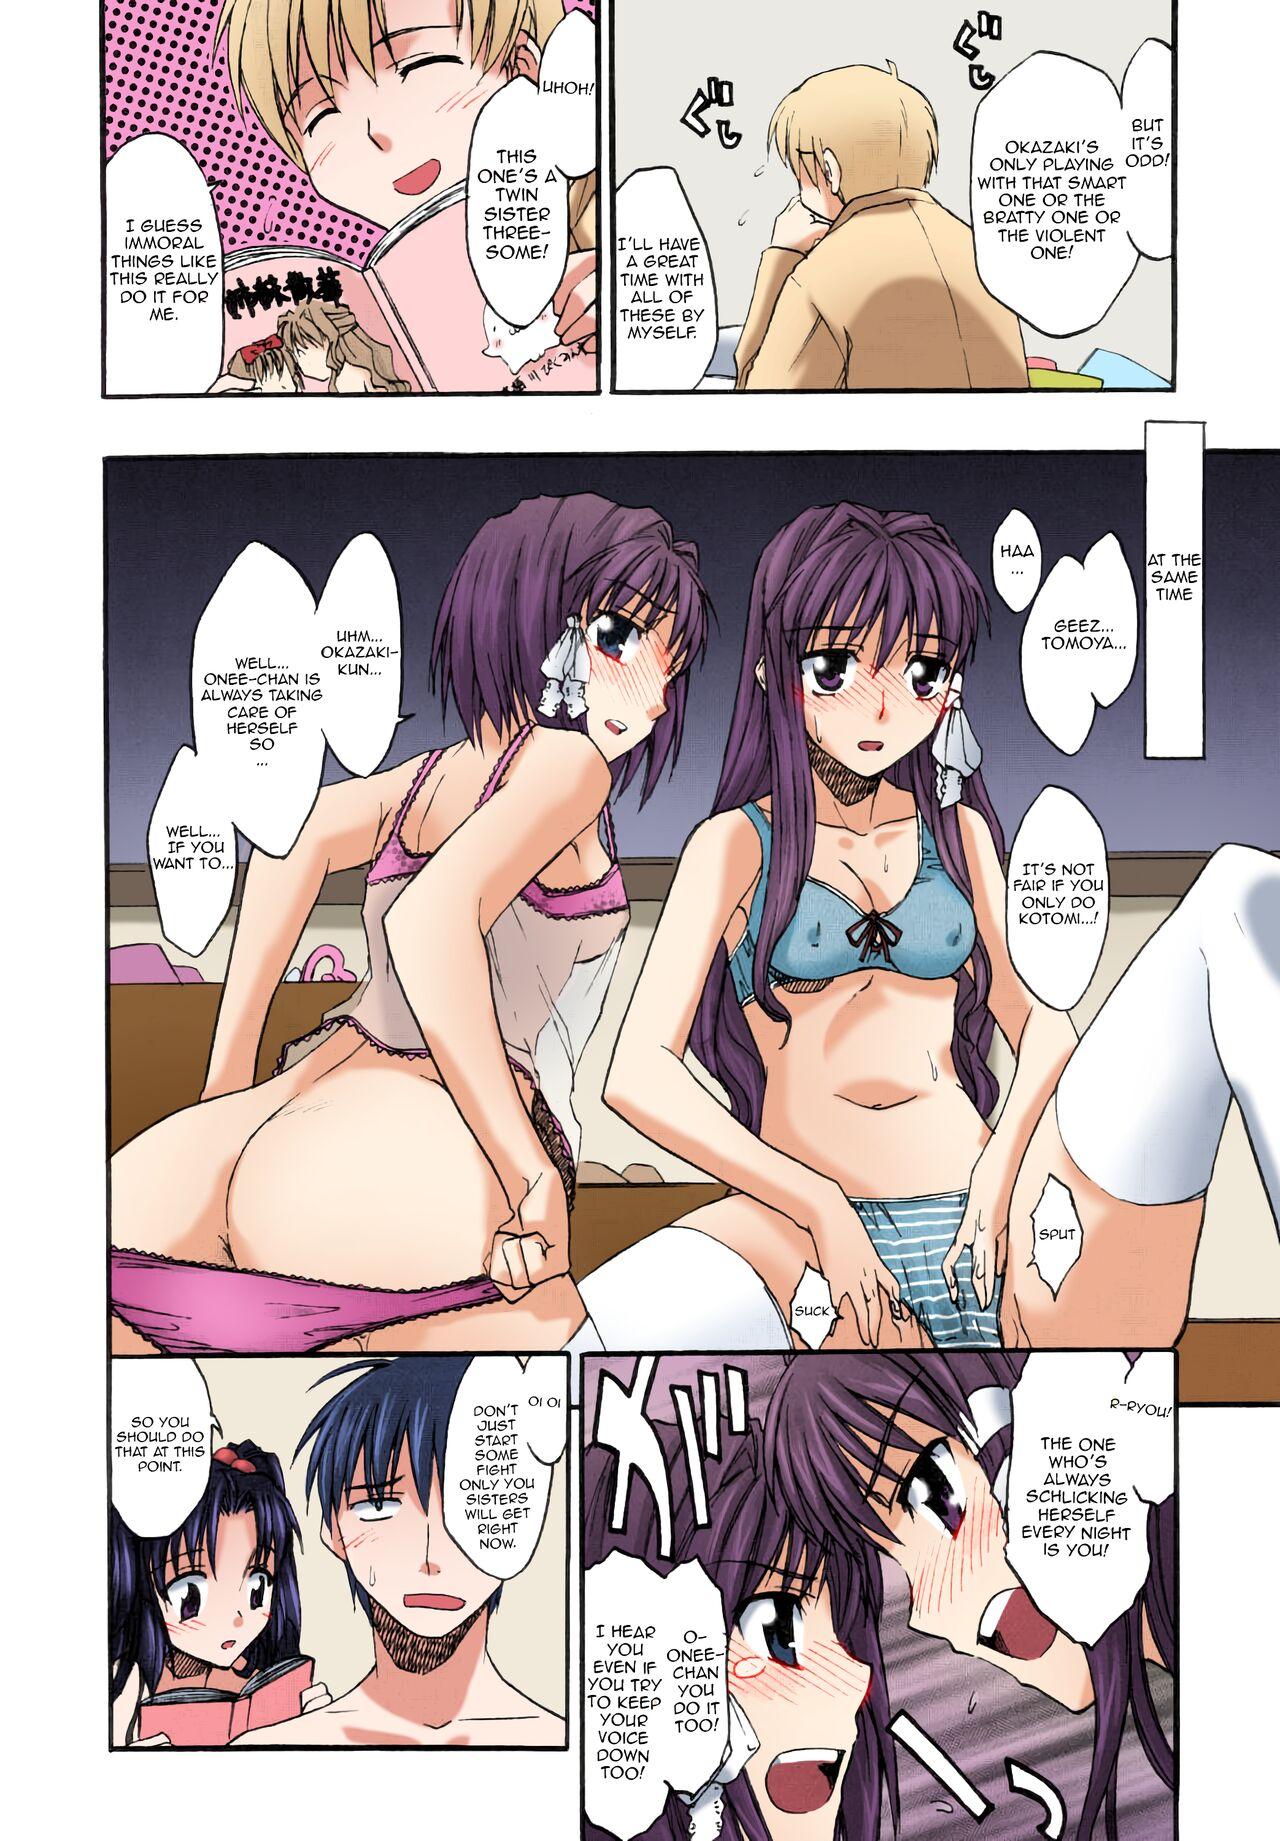 Perfect Body Fantastic4 - Clannad T Girl - Page 7